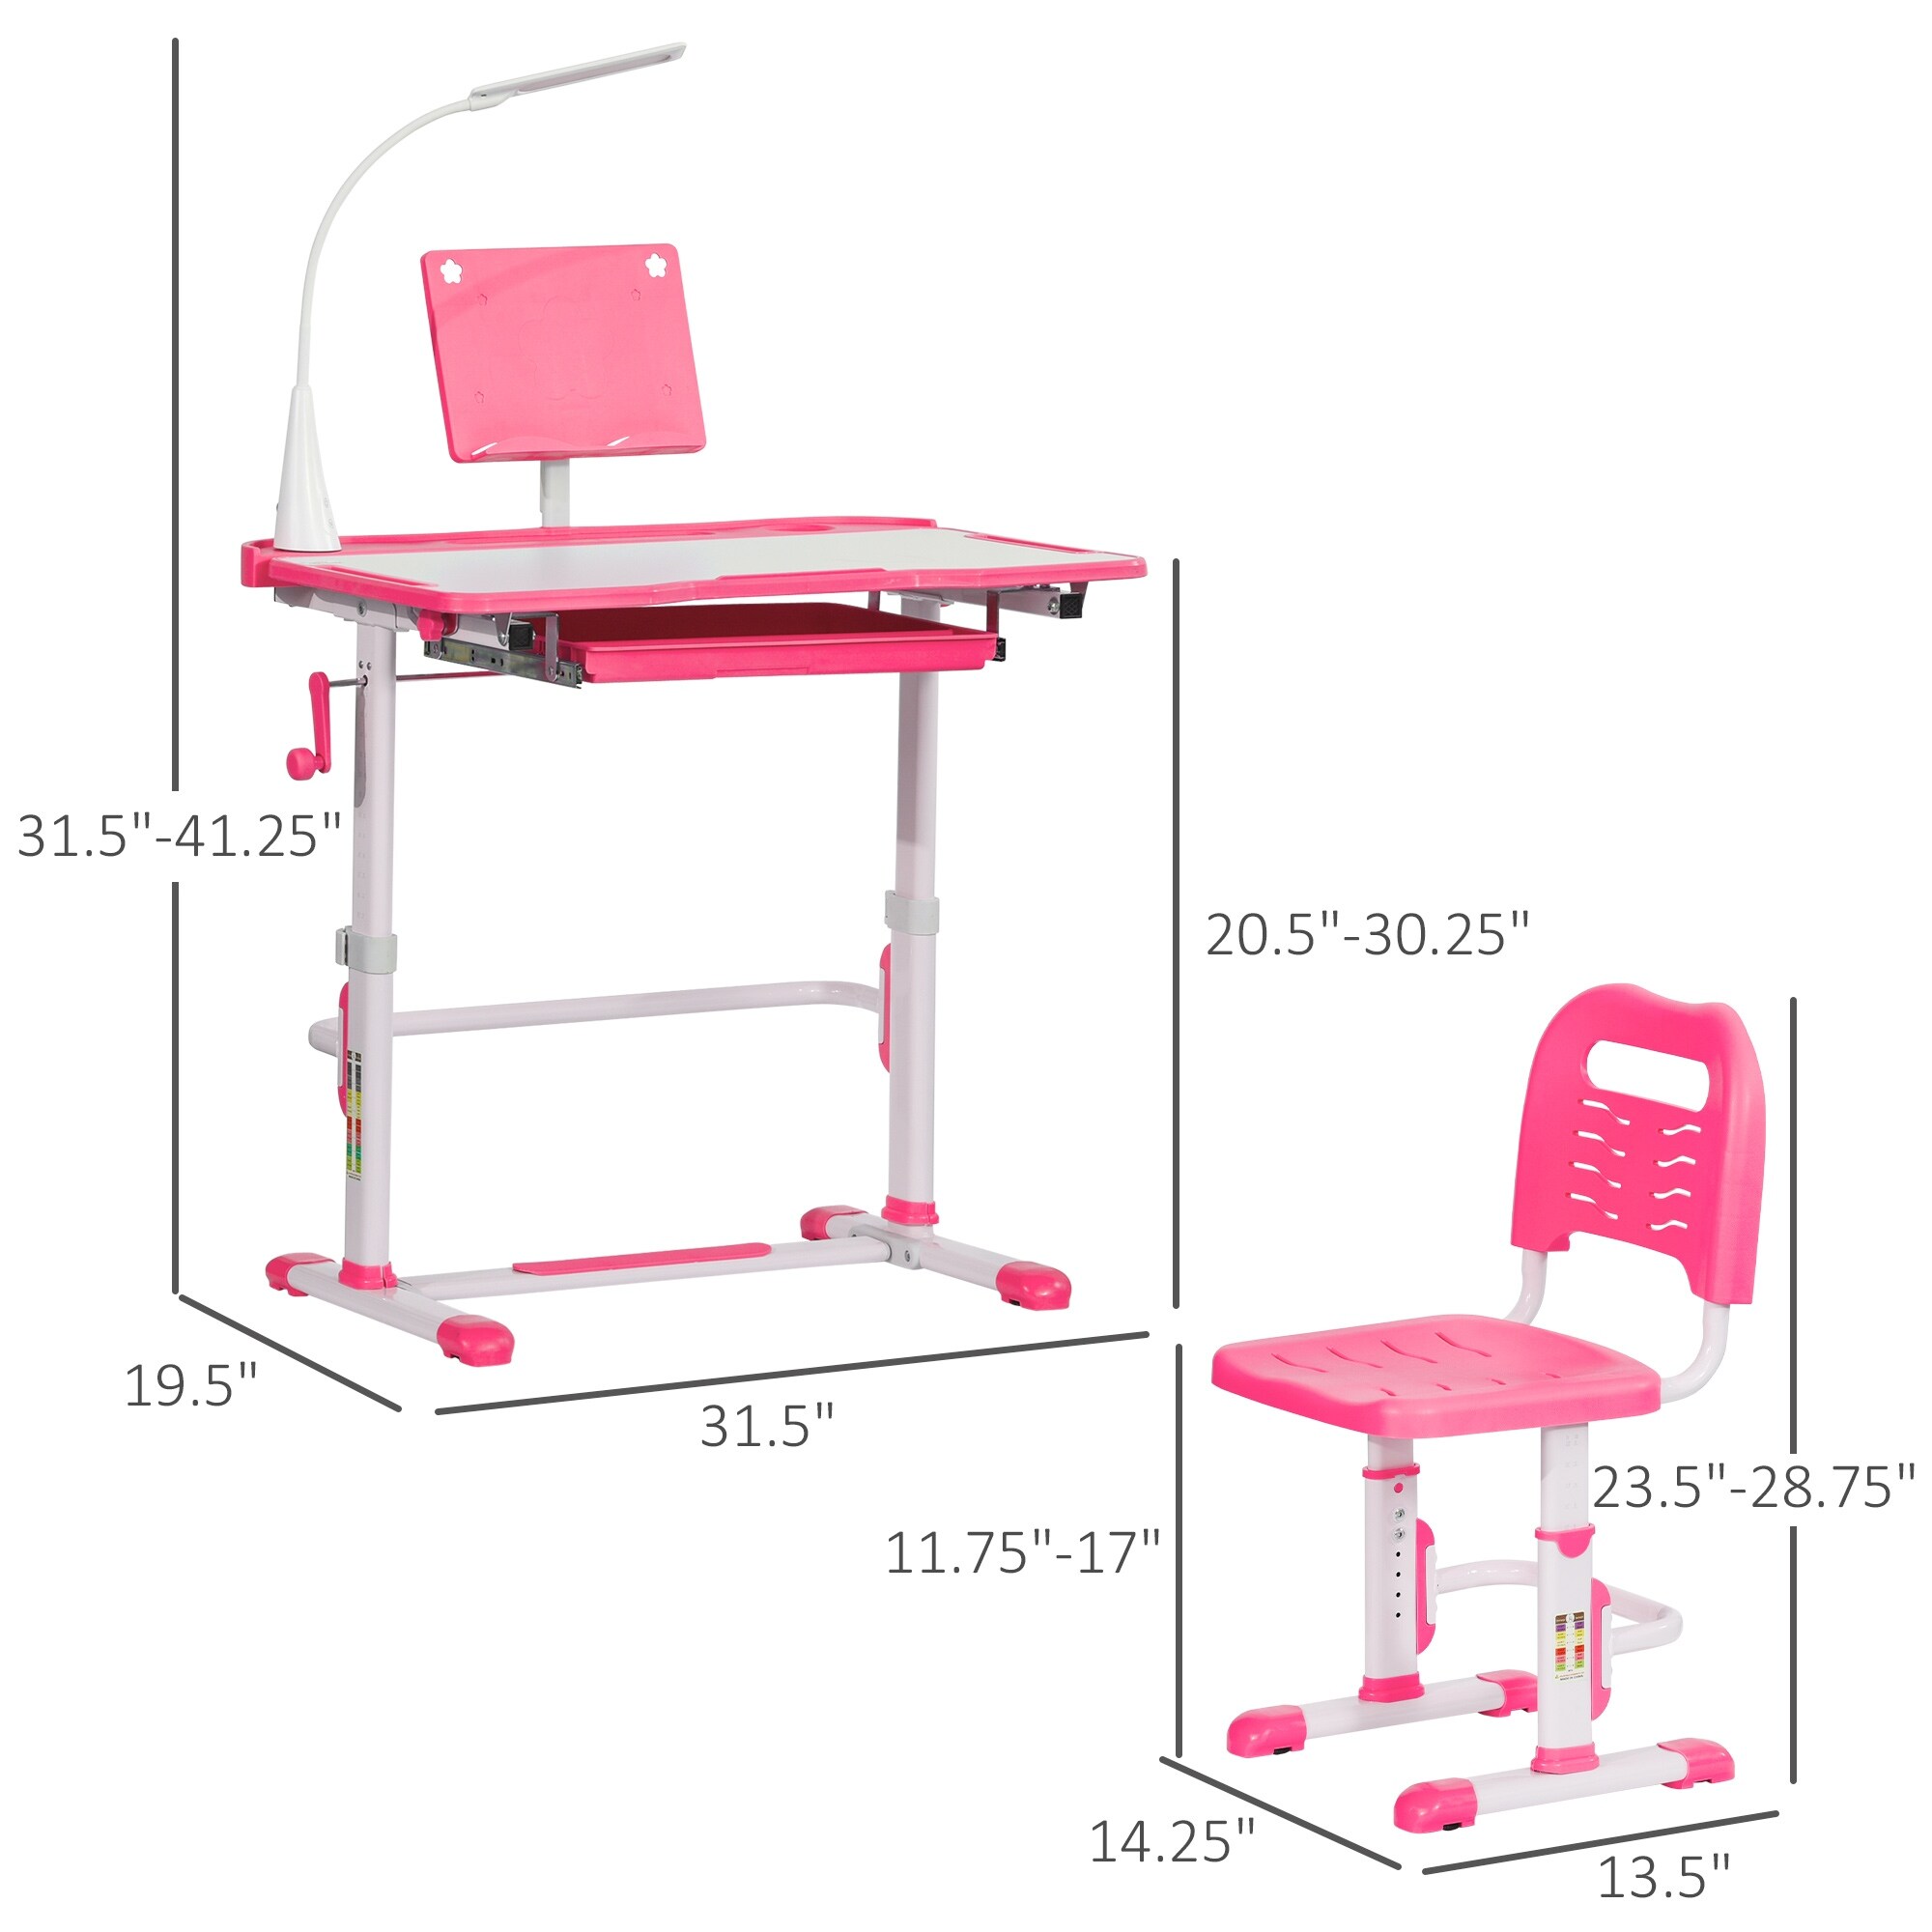 https://ak1.ostkcdn.com/images/products/is/images/direct/ef98c44755552d5344438af7c6e7babc44b26c9f/Qaba-Kids-Desk-and-Chair-Set-Height-Adjustable-Children-School-Study-Table-Student-Writing-Desk-with-Tilt-Desktop%2C-LED-Lamp.jpg